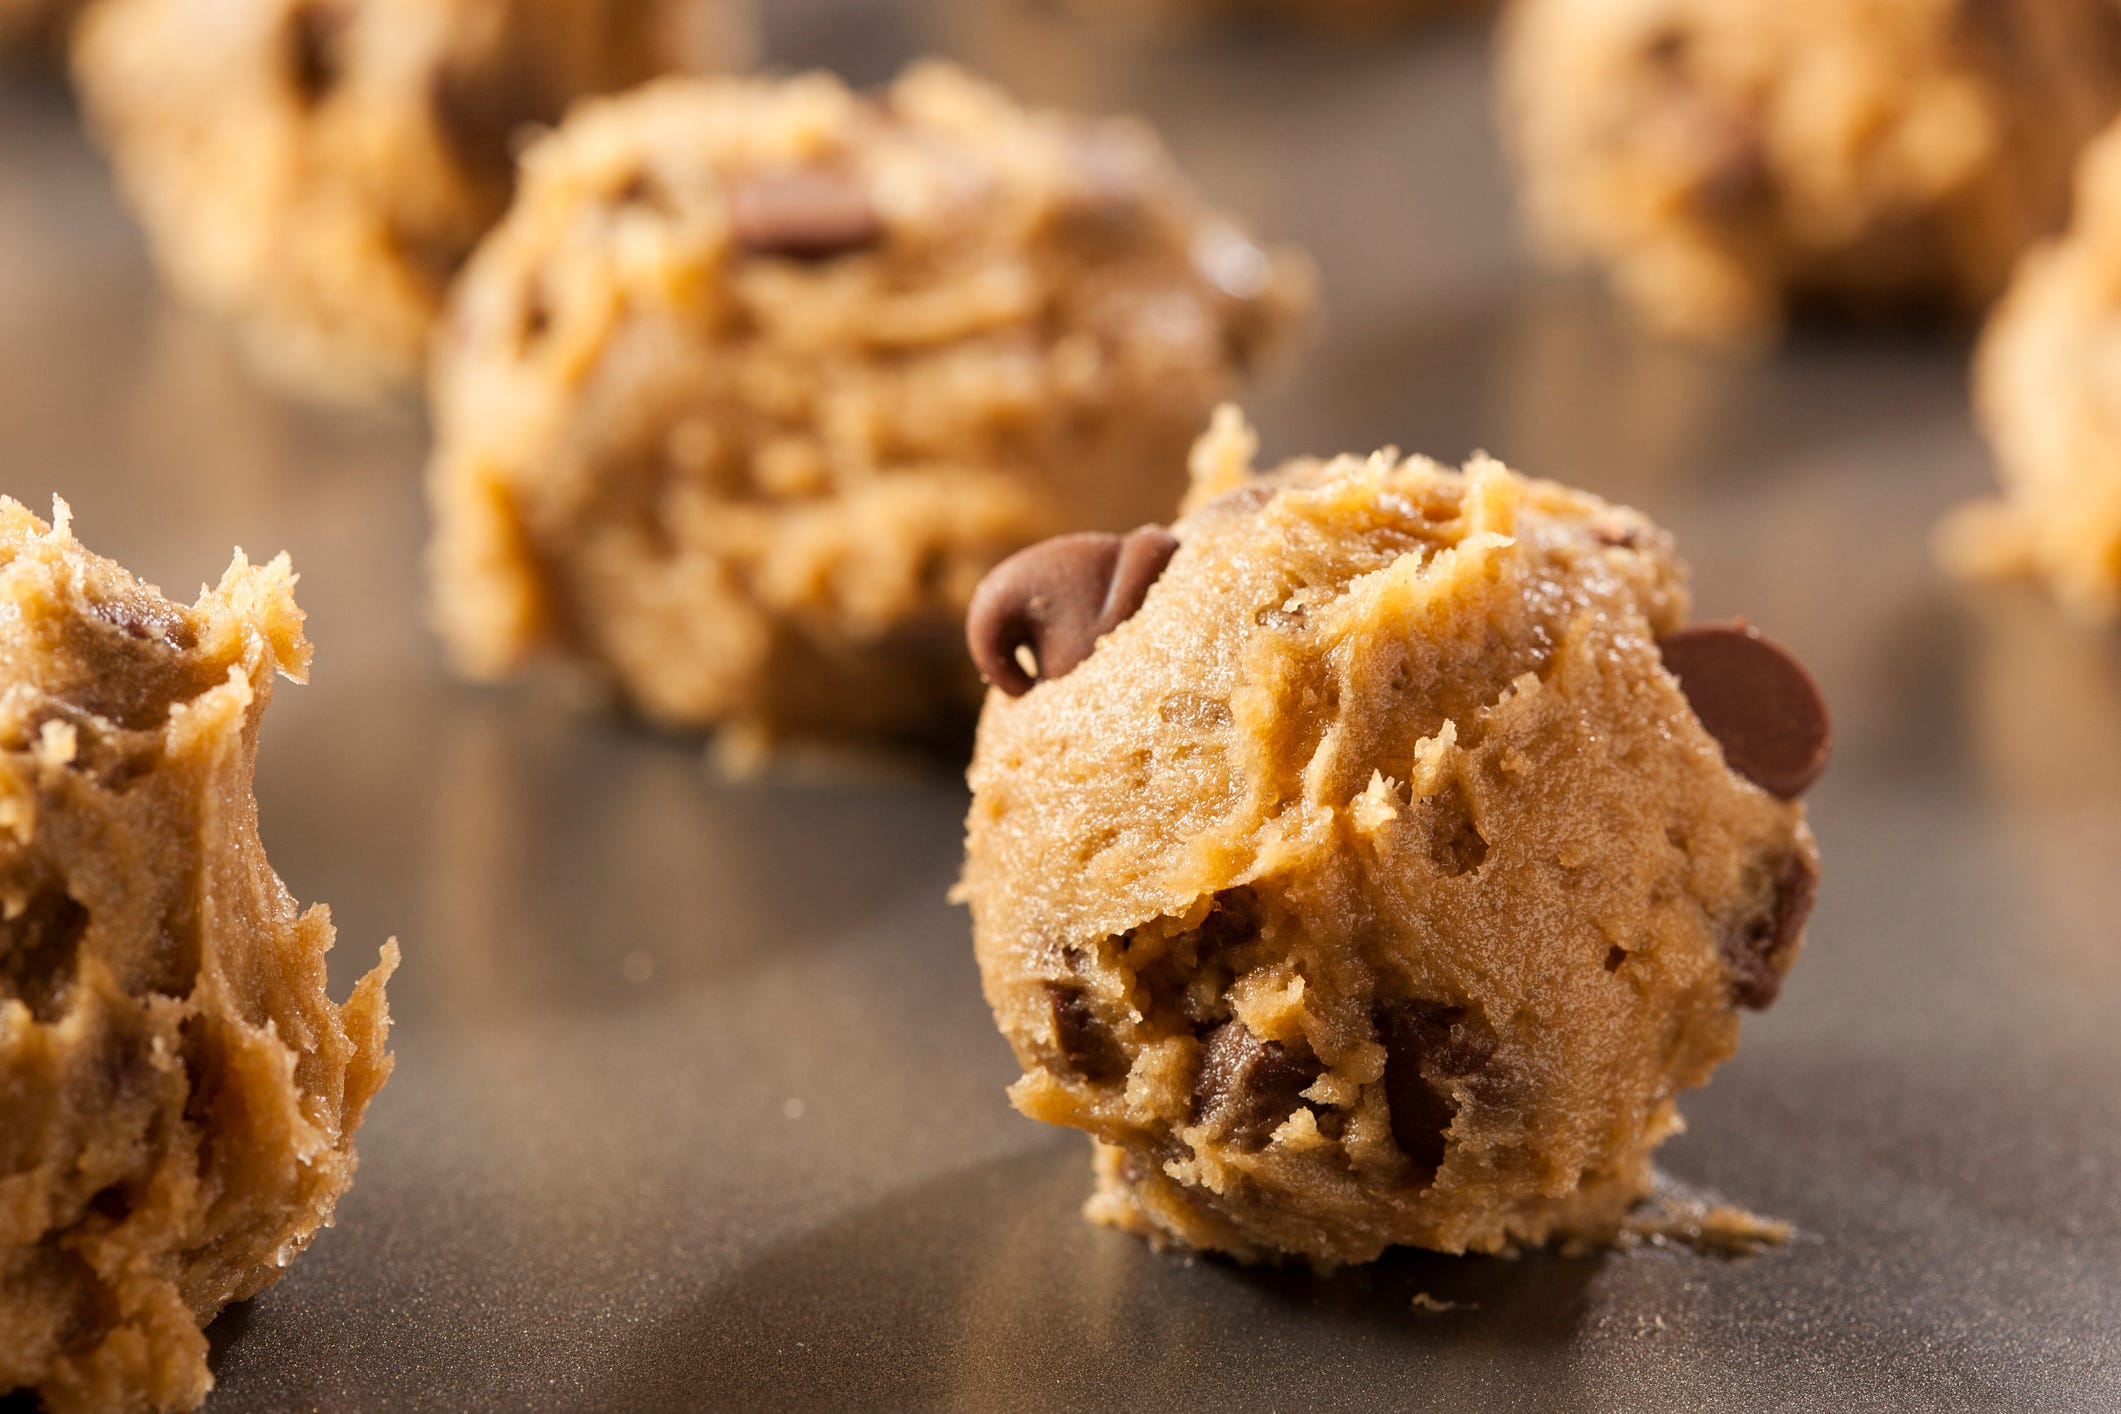 salmonella outbreak may be connected to cookie dough